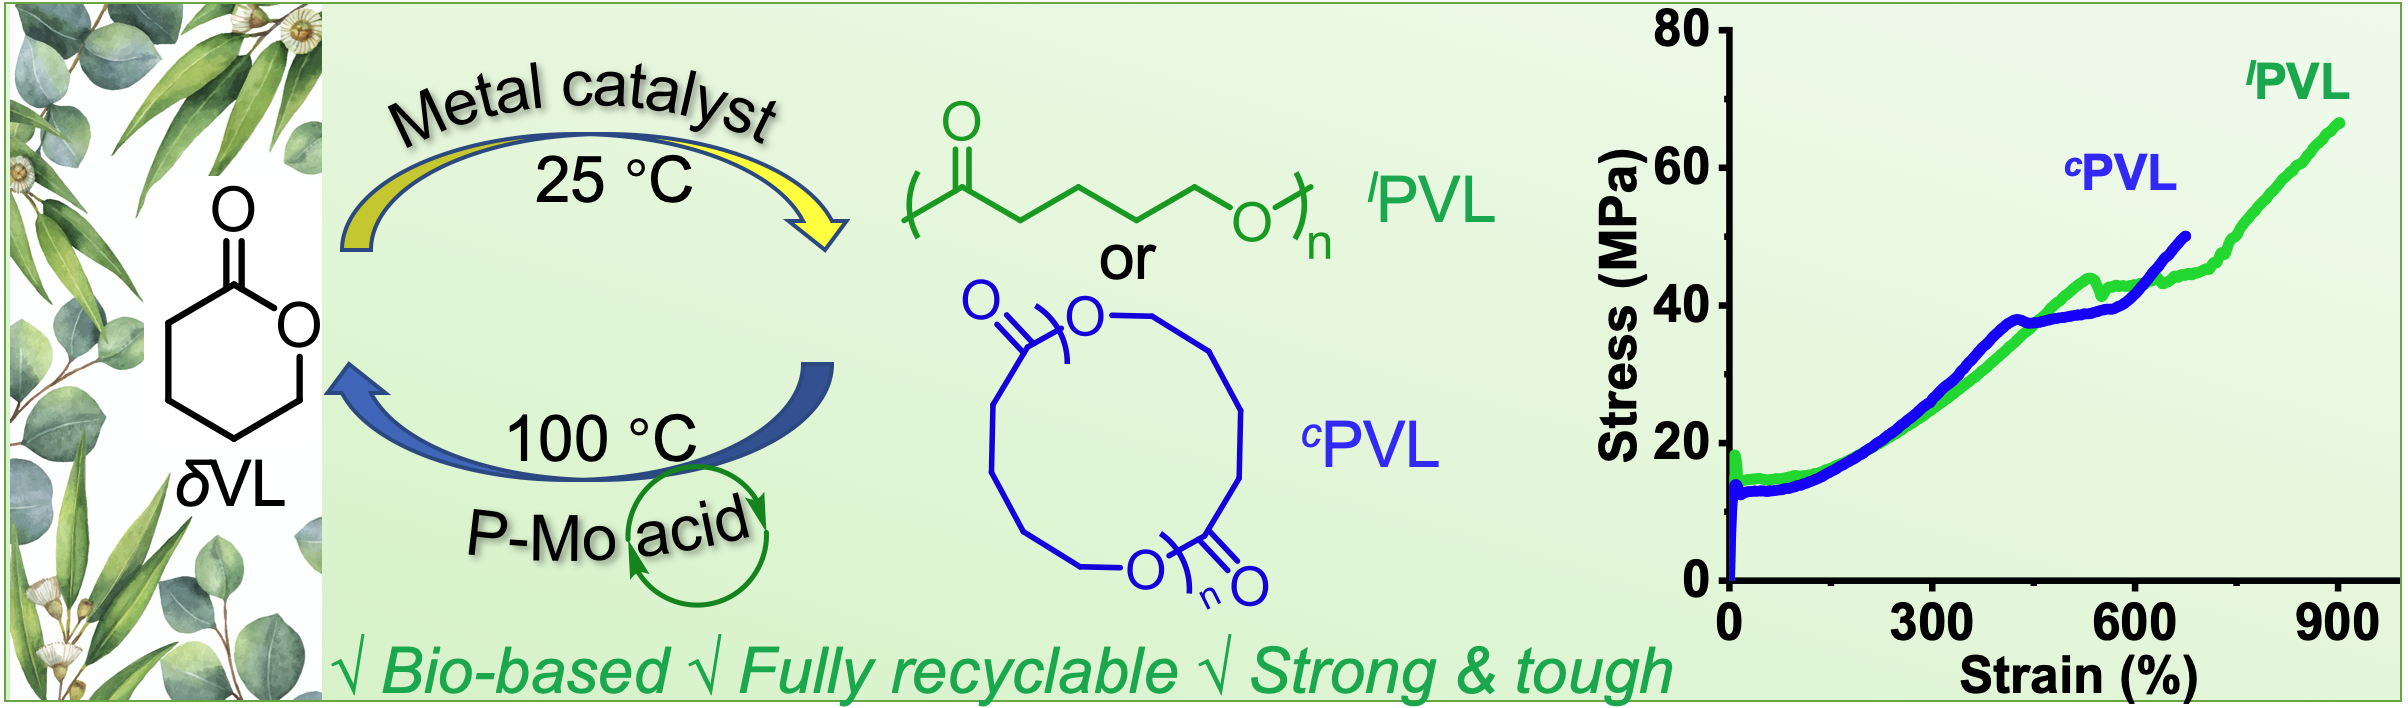 Recyclable cyclic bio-based acrylic polymer via pairwise monomer  enchainment by a trifunctional Lewis pair